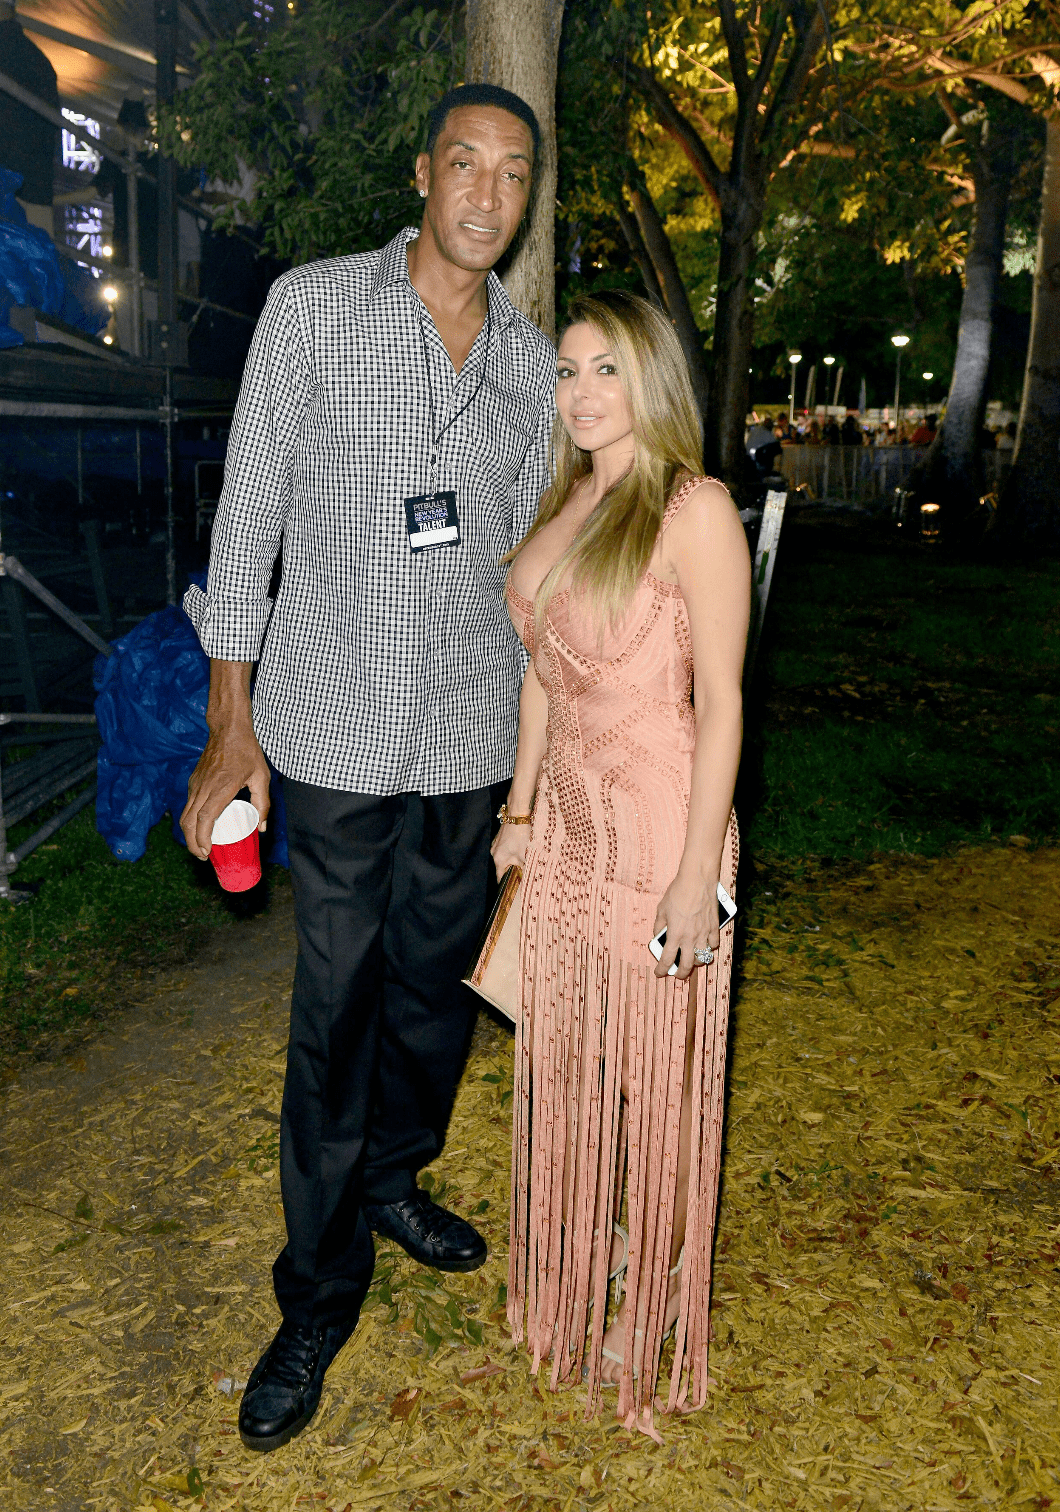 Scottie and Larsa Pippen at the Pitbulls New Years Eve Revolution in Miami in 2015 | Source: Getty Images